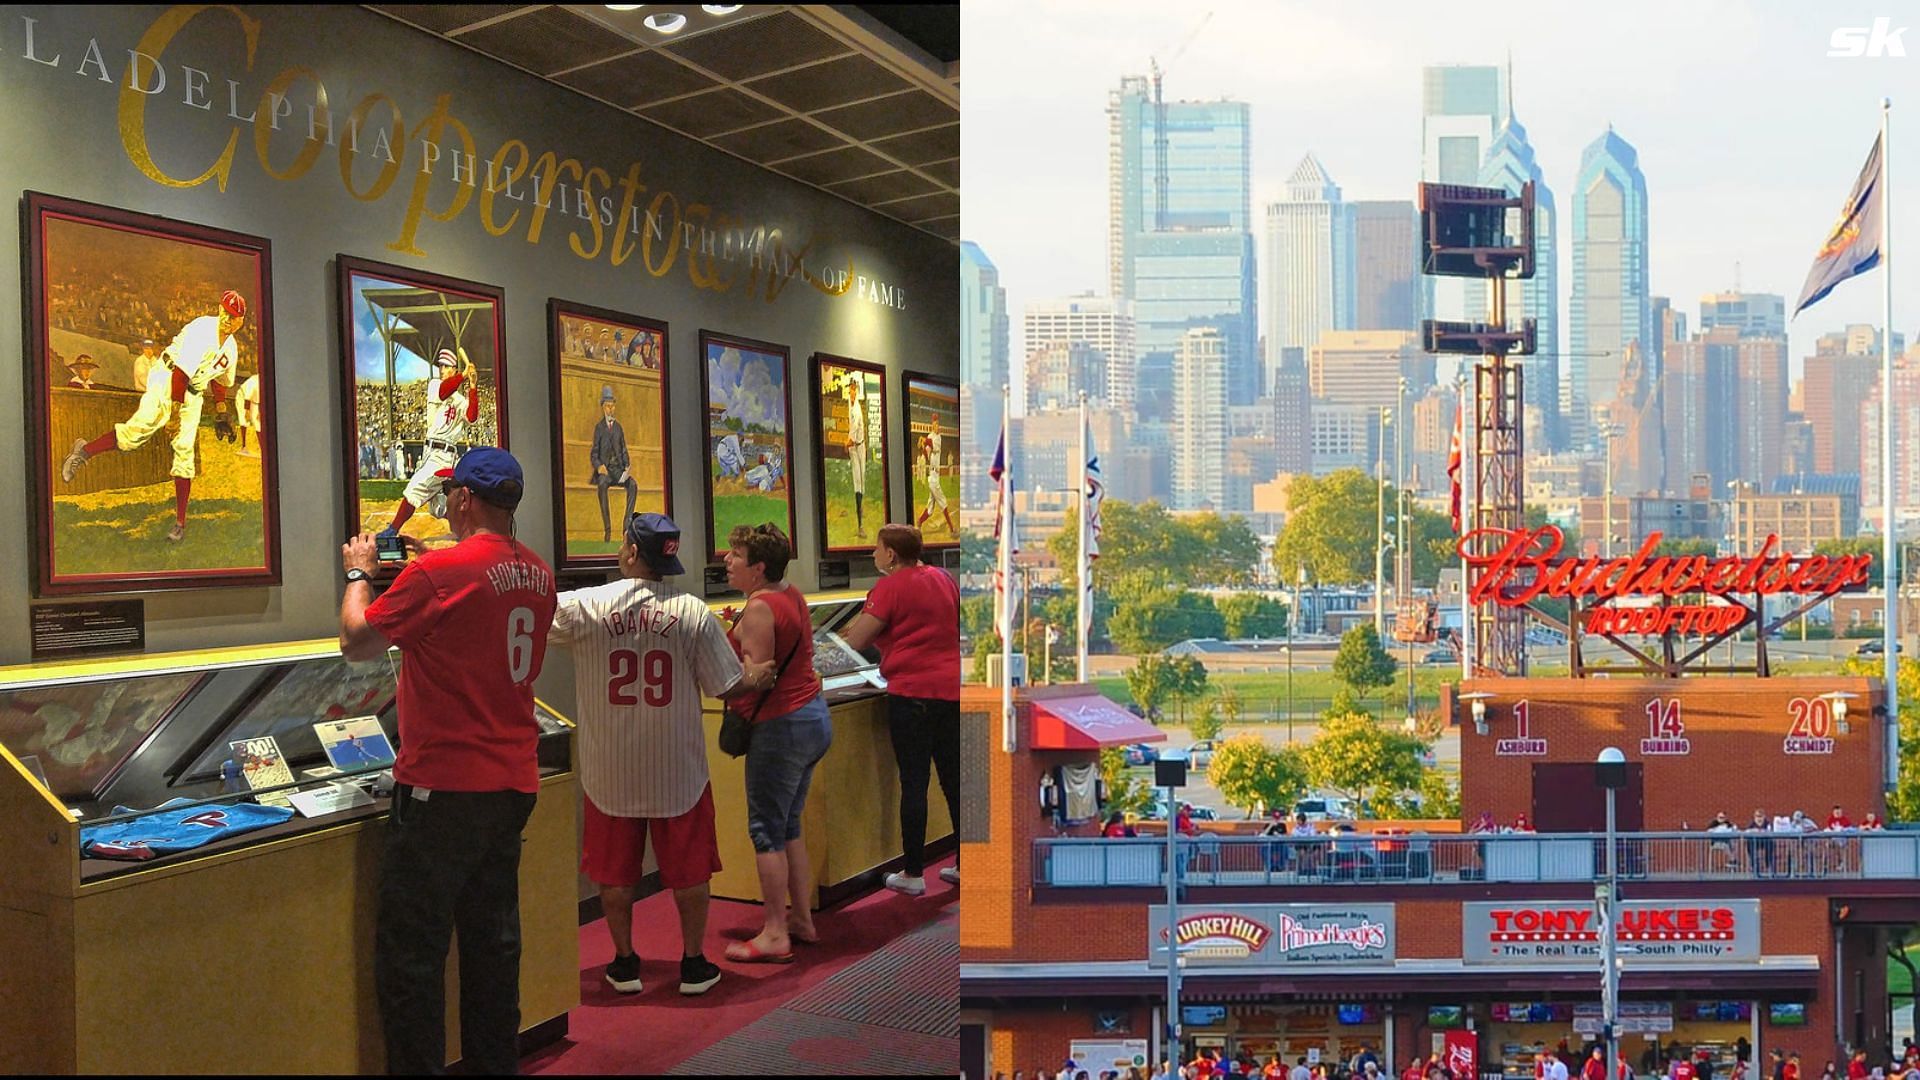 Cooperstown Gallery and the amazing Skyline inside Citizens Bank Park